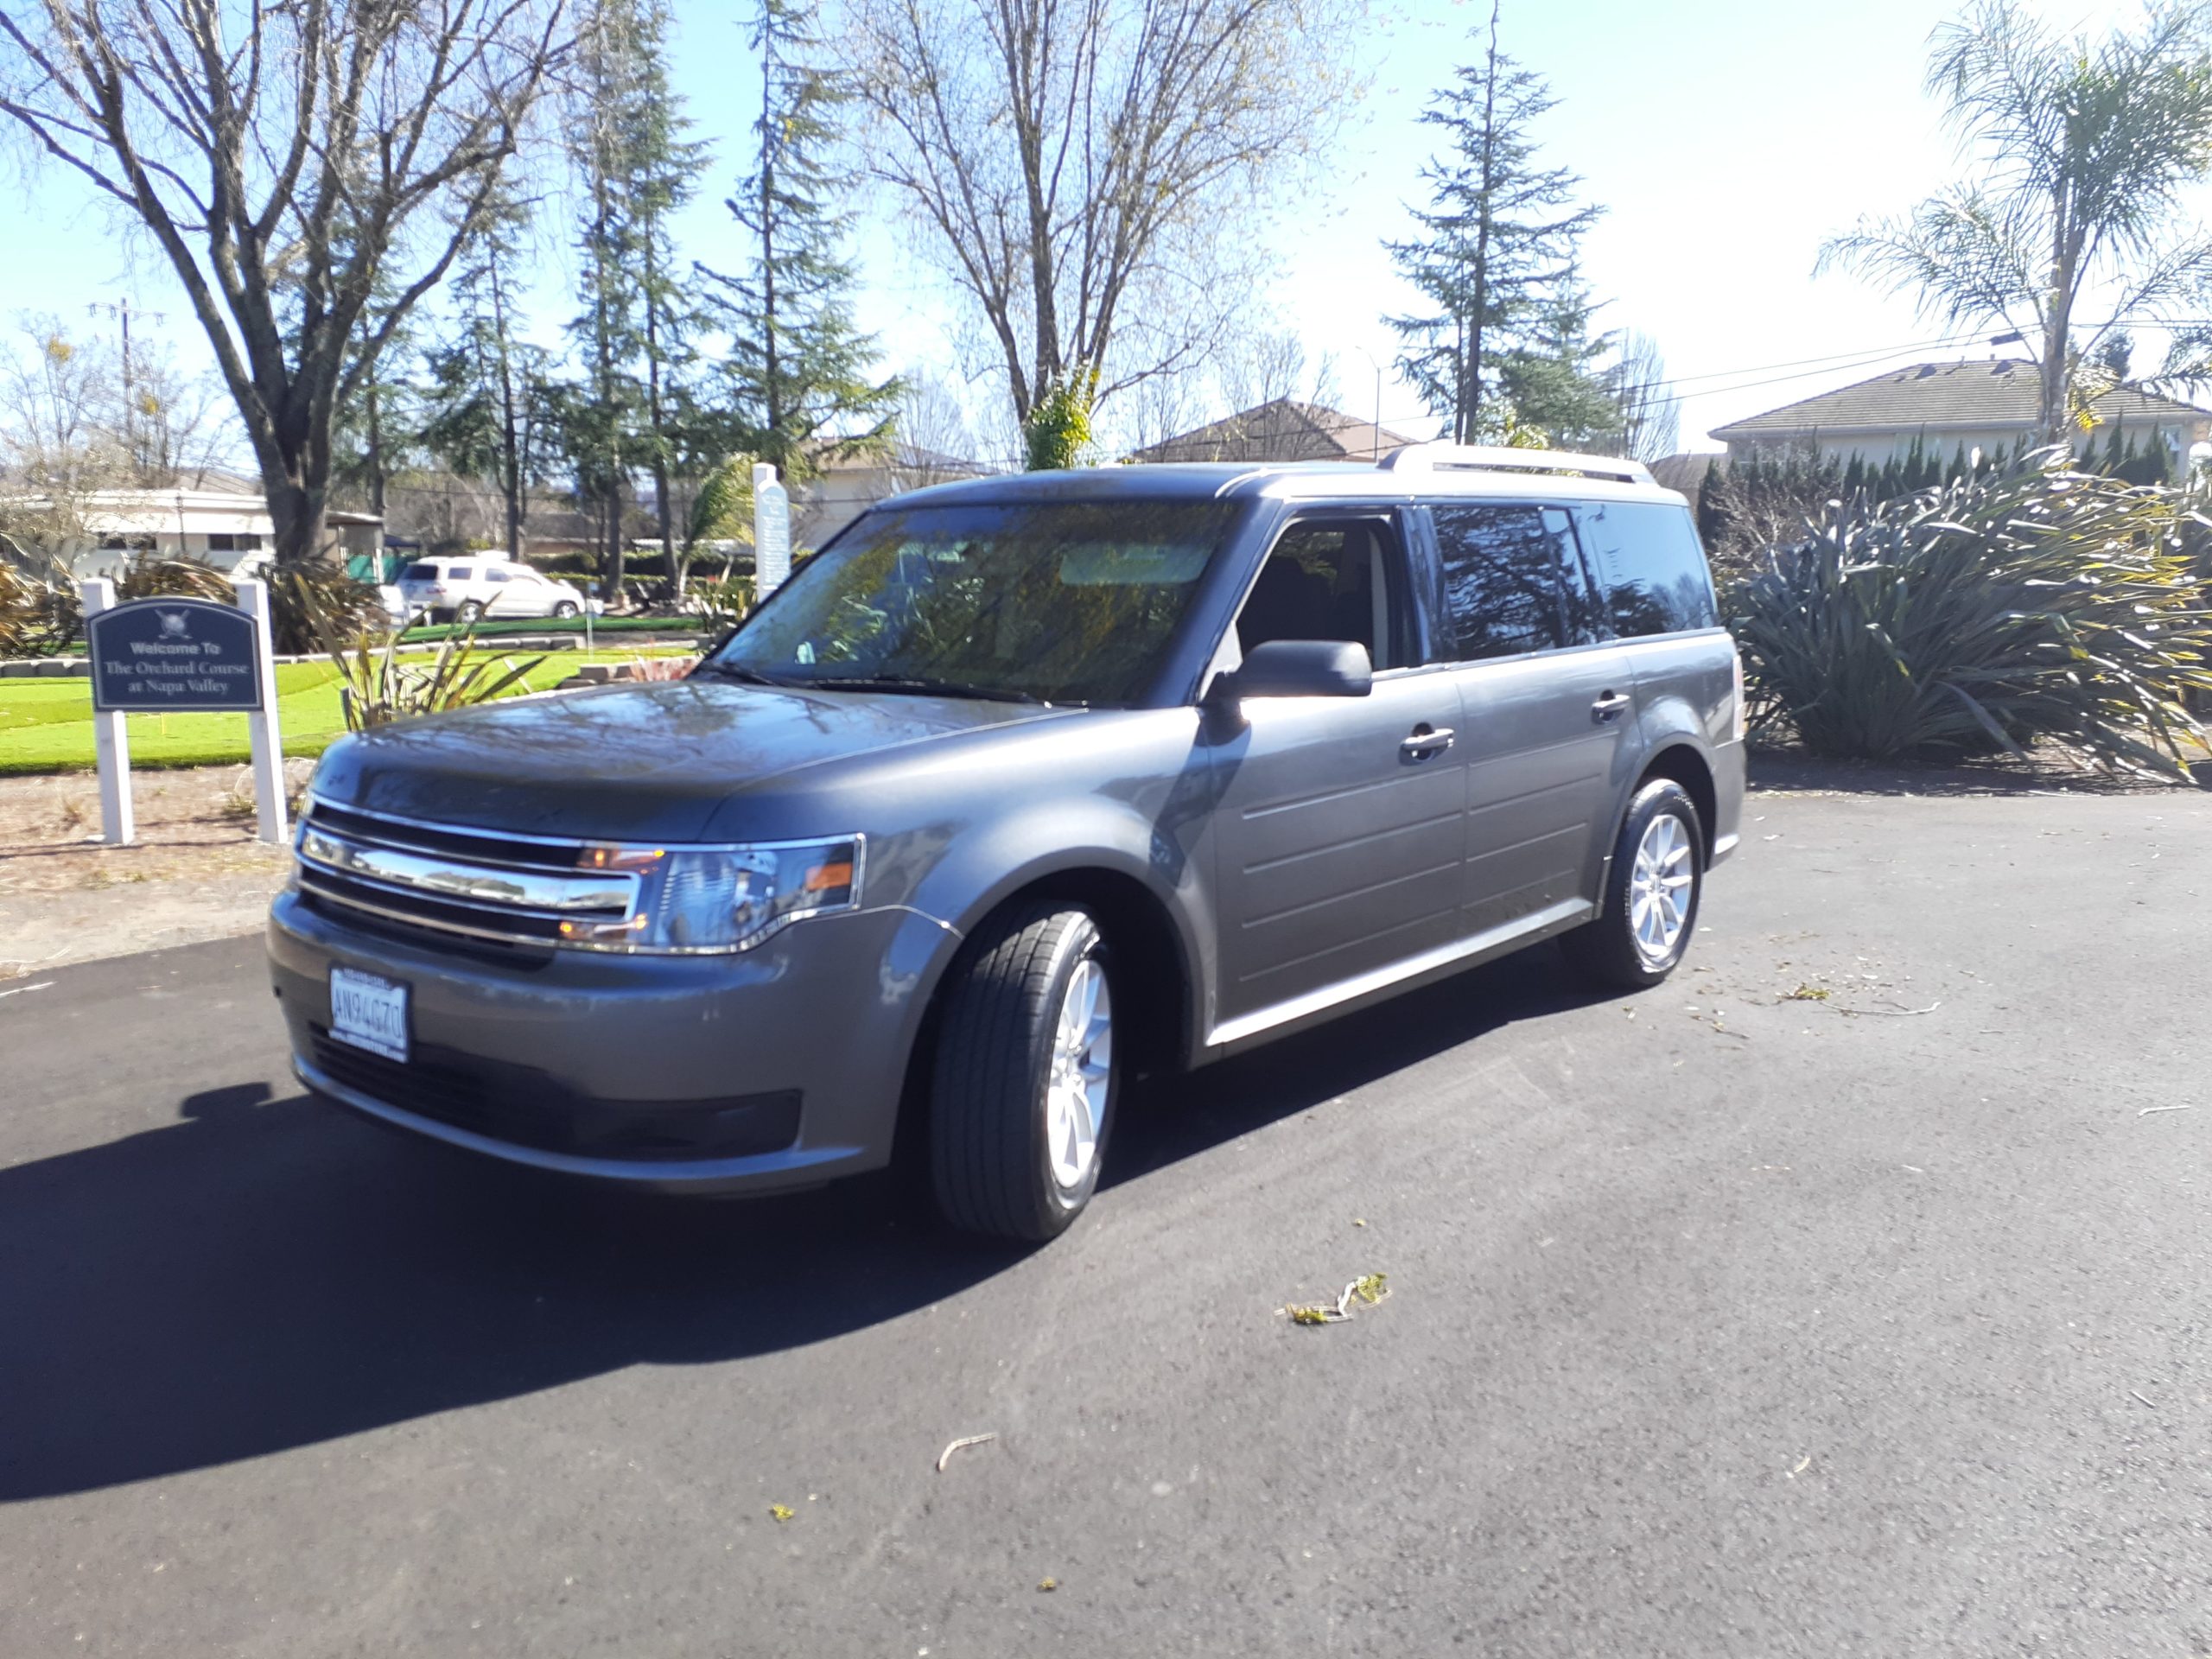 Ford Flex SUV $80 an hour with a 6 hour minimum and 20% gratity for the driver!